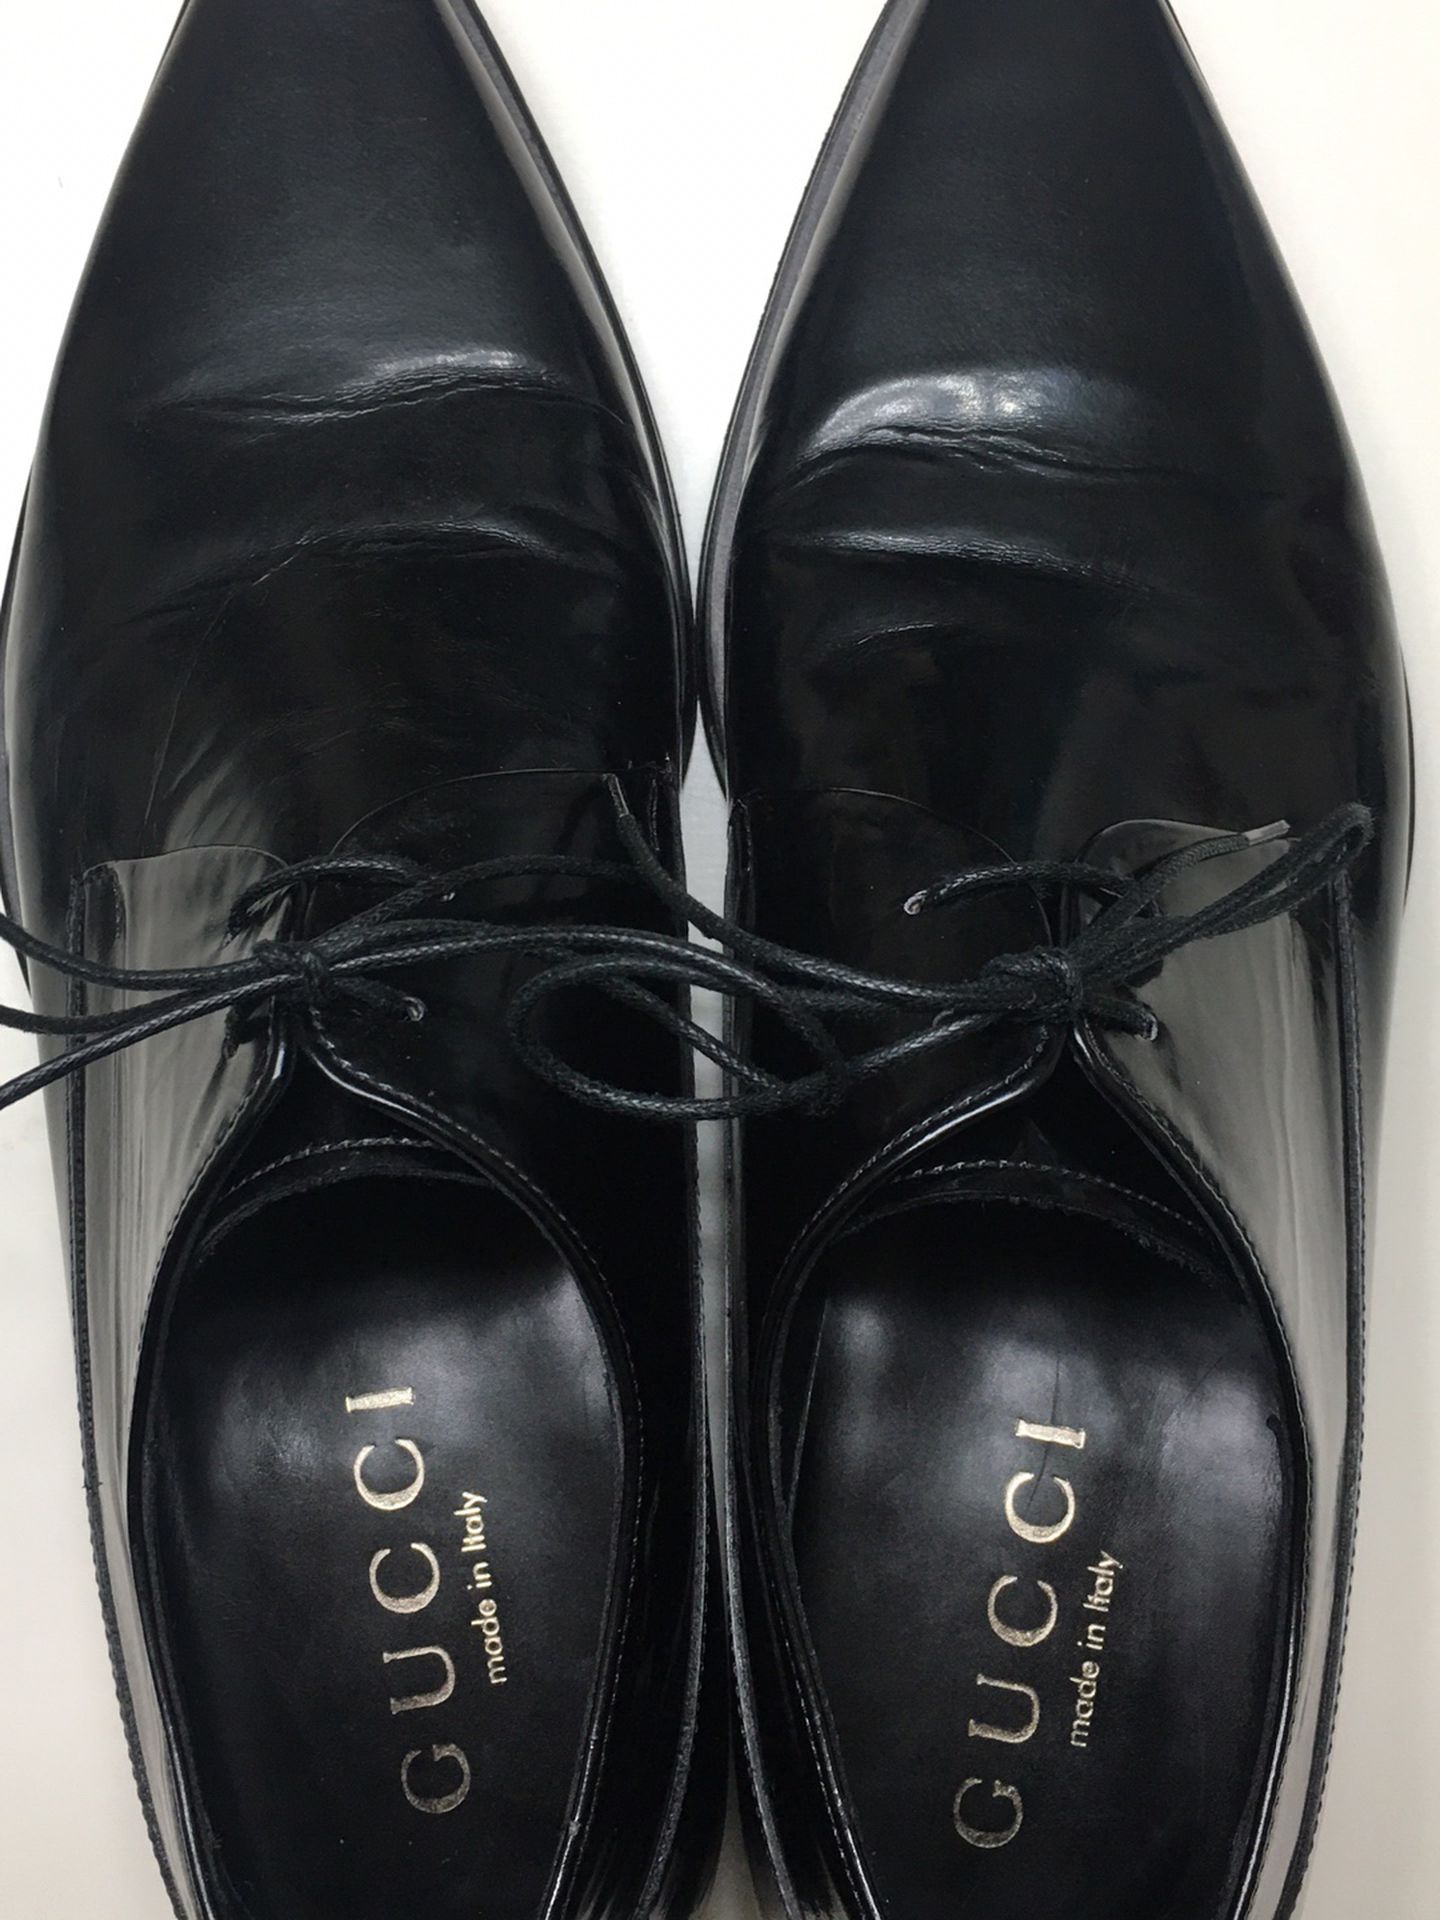 Gucci Black Leather Oxford Dress Shoes Made In Italy 8.5D